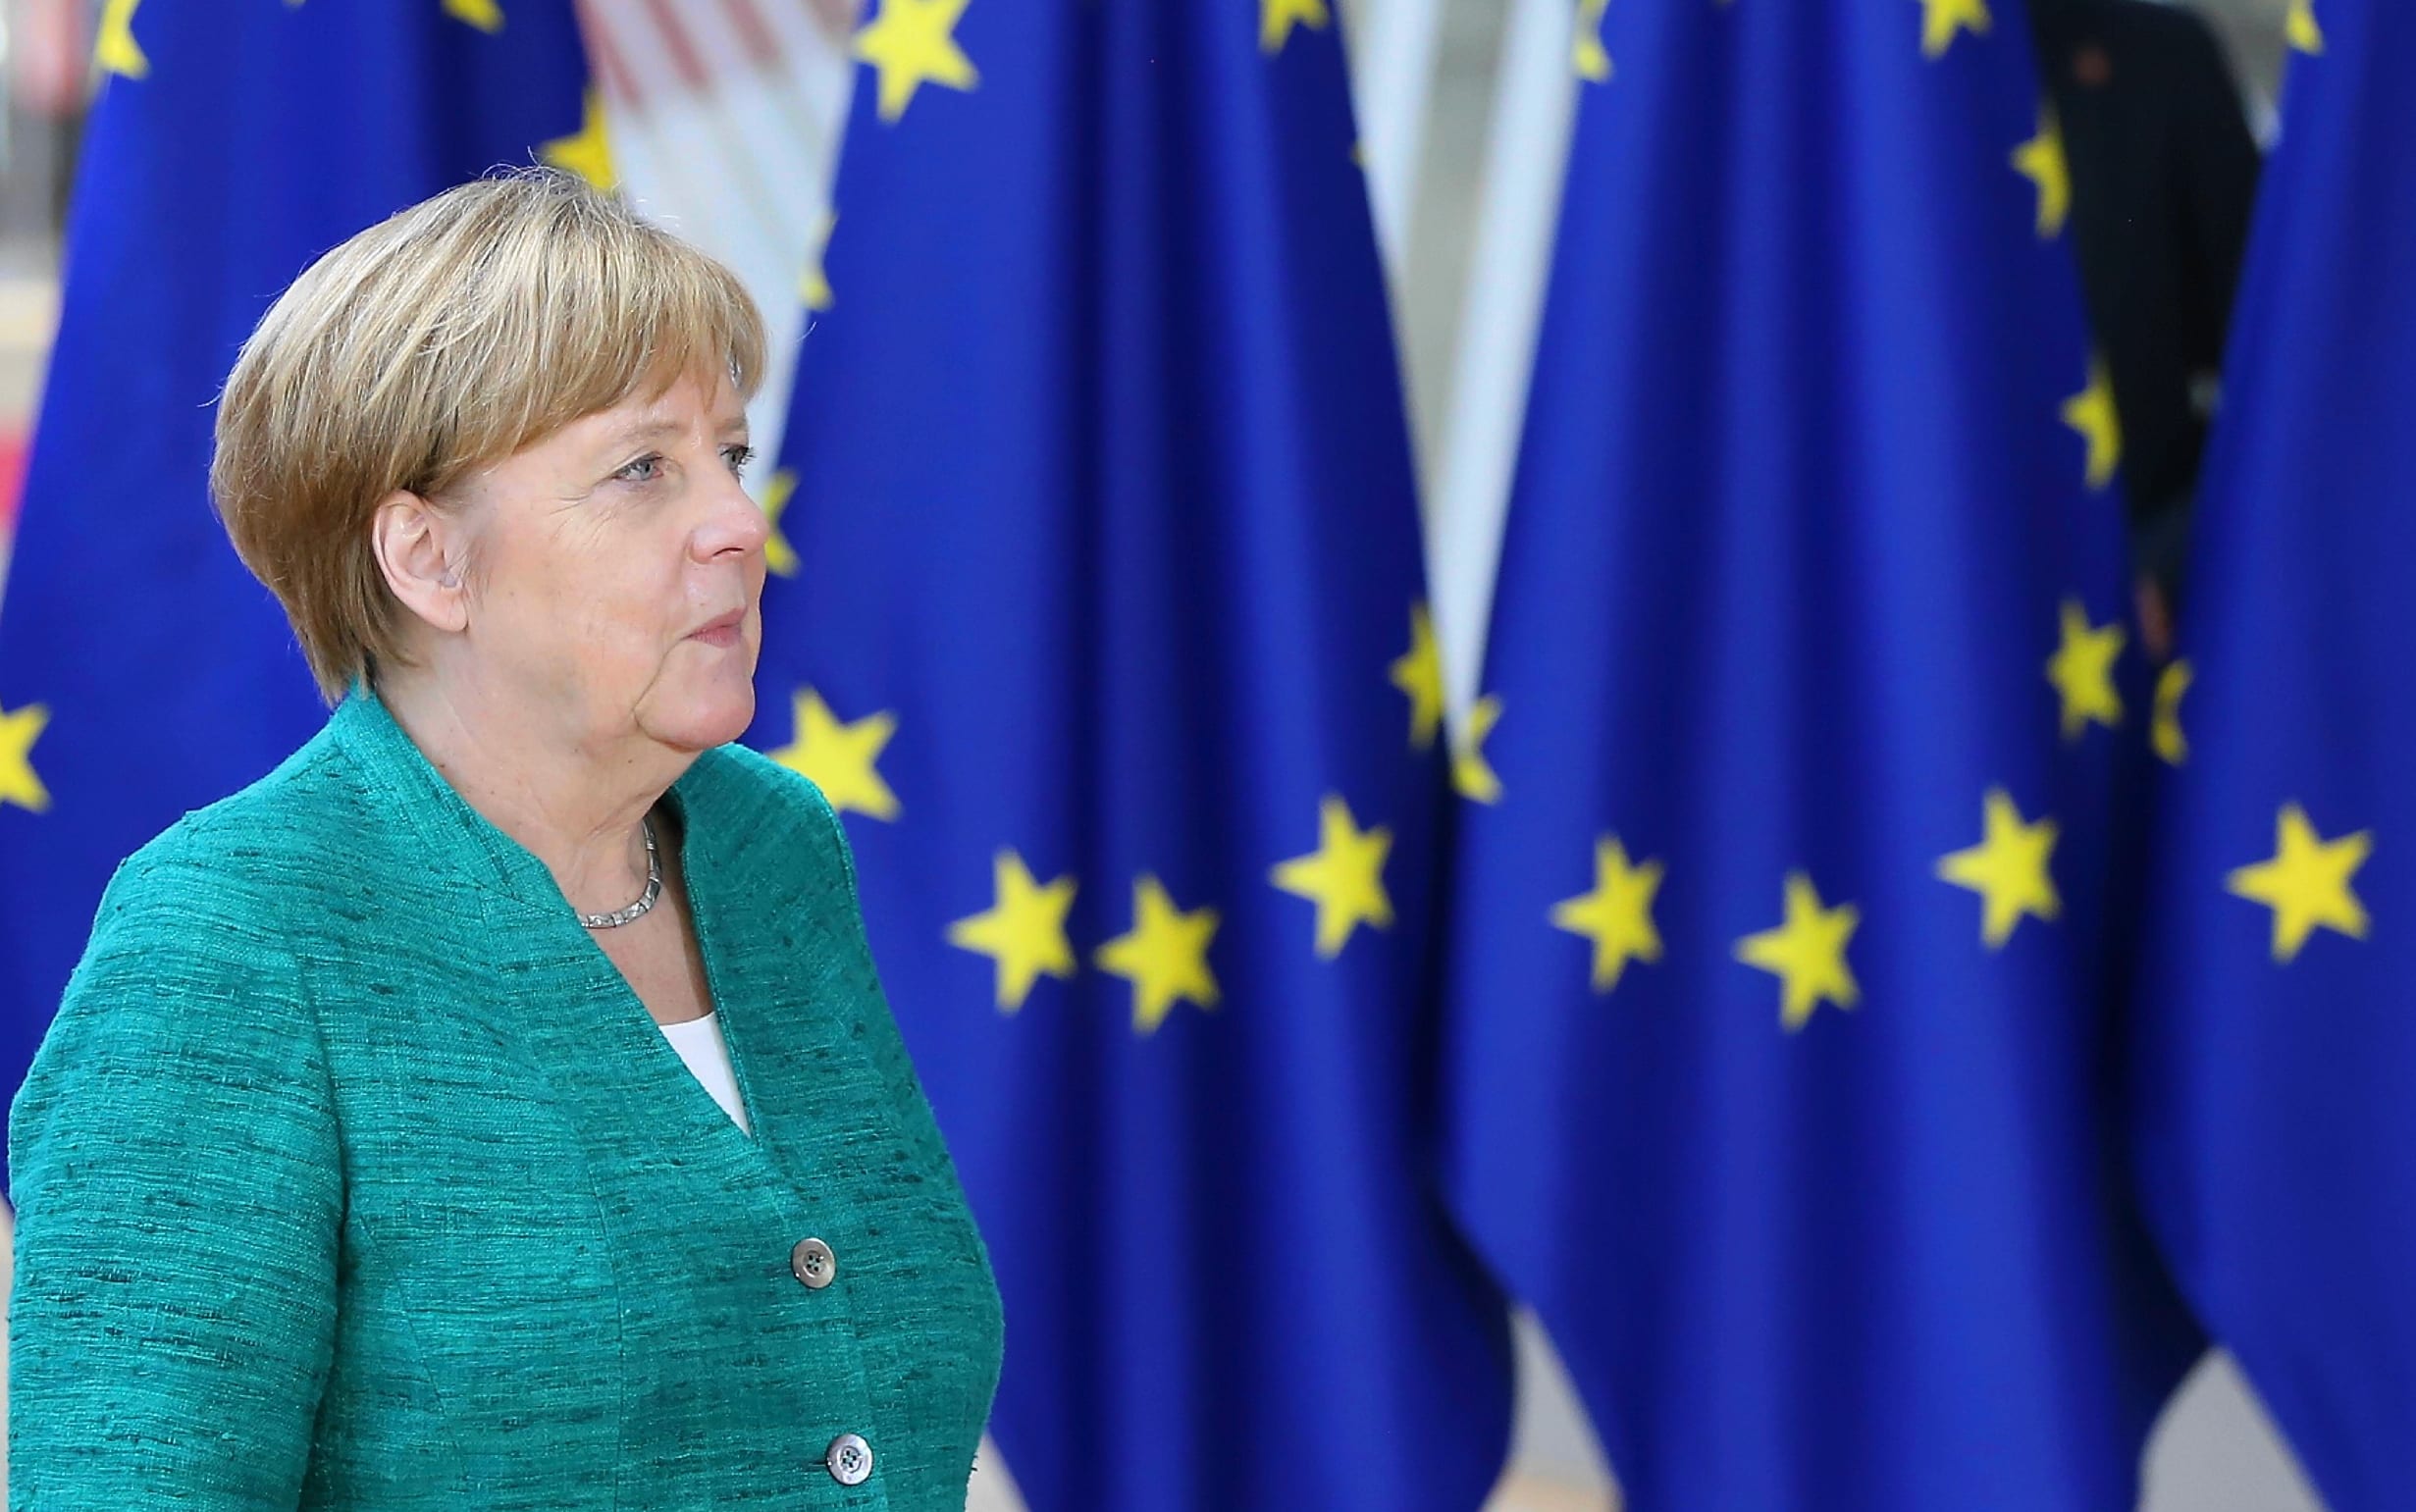 German Chancellor Angela Merkel attends the EU Leaders summit in Belgium, to focus on the migrant issue, the relations with the US, cooperation in defense and security, and the economic and monetary union.